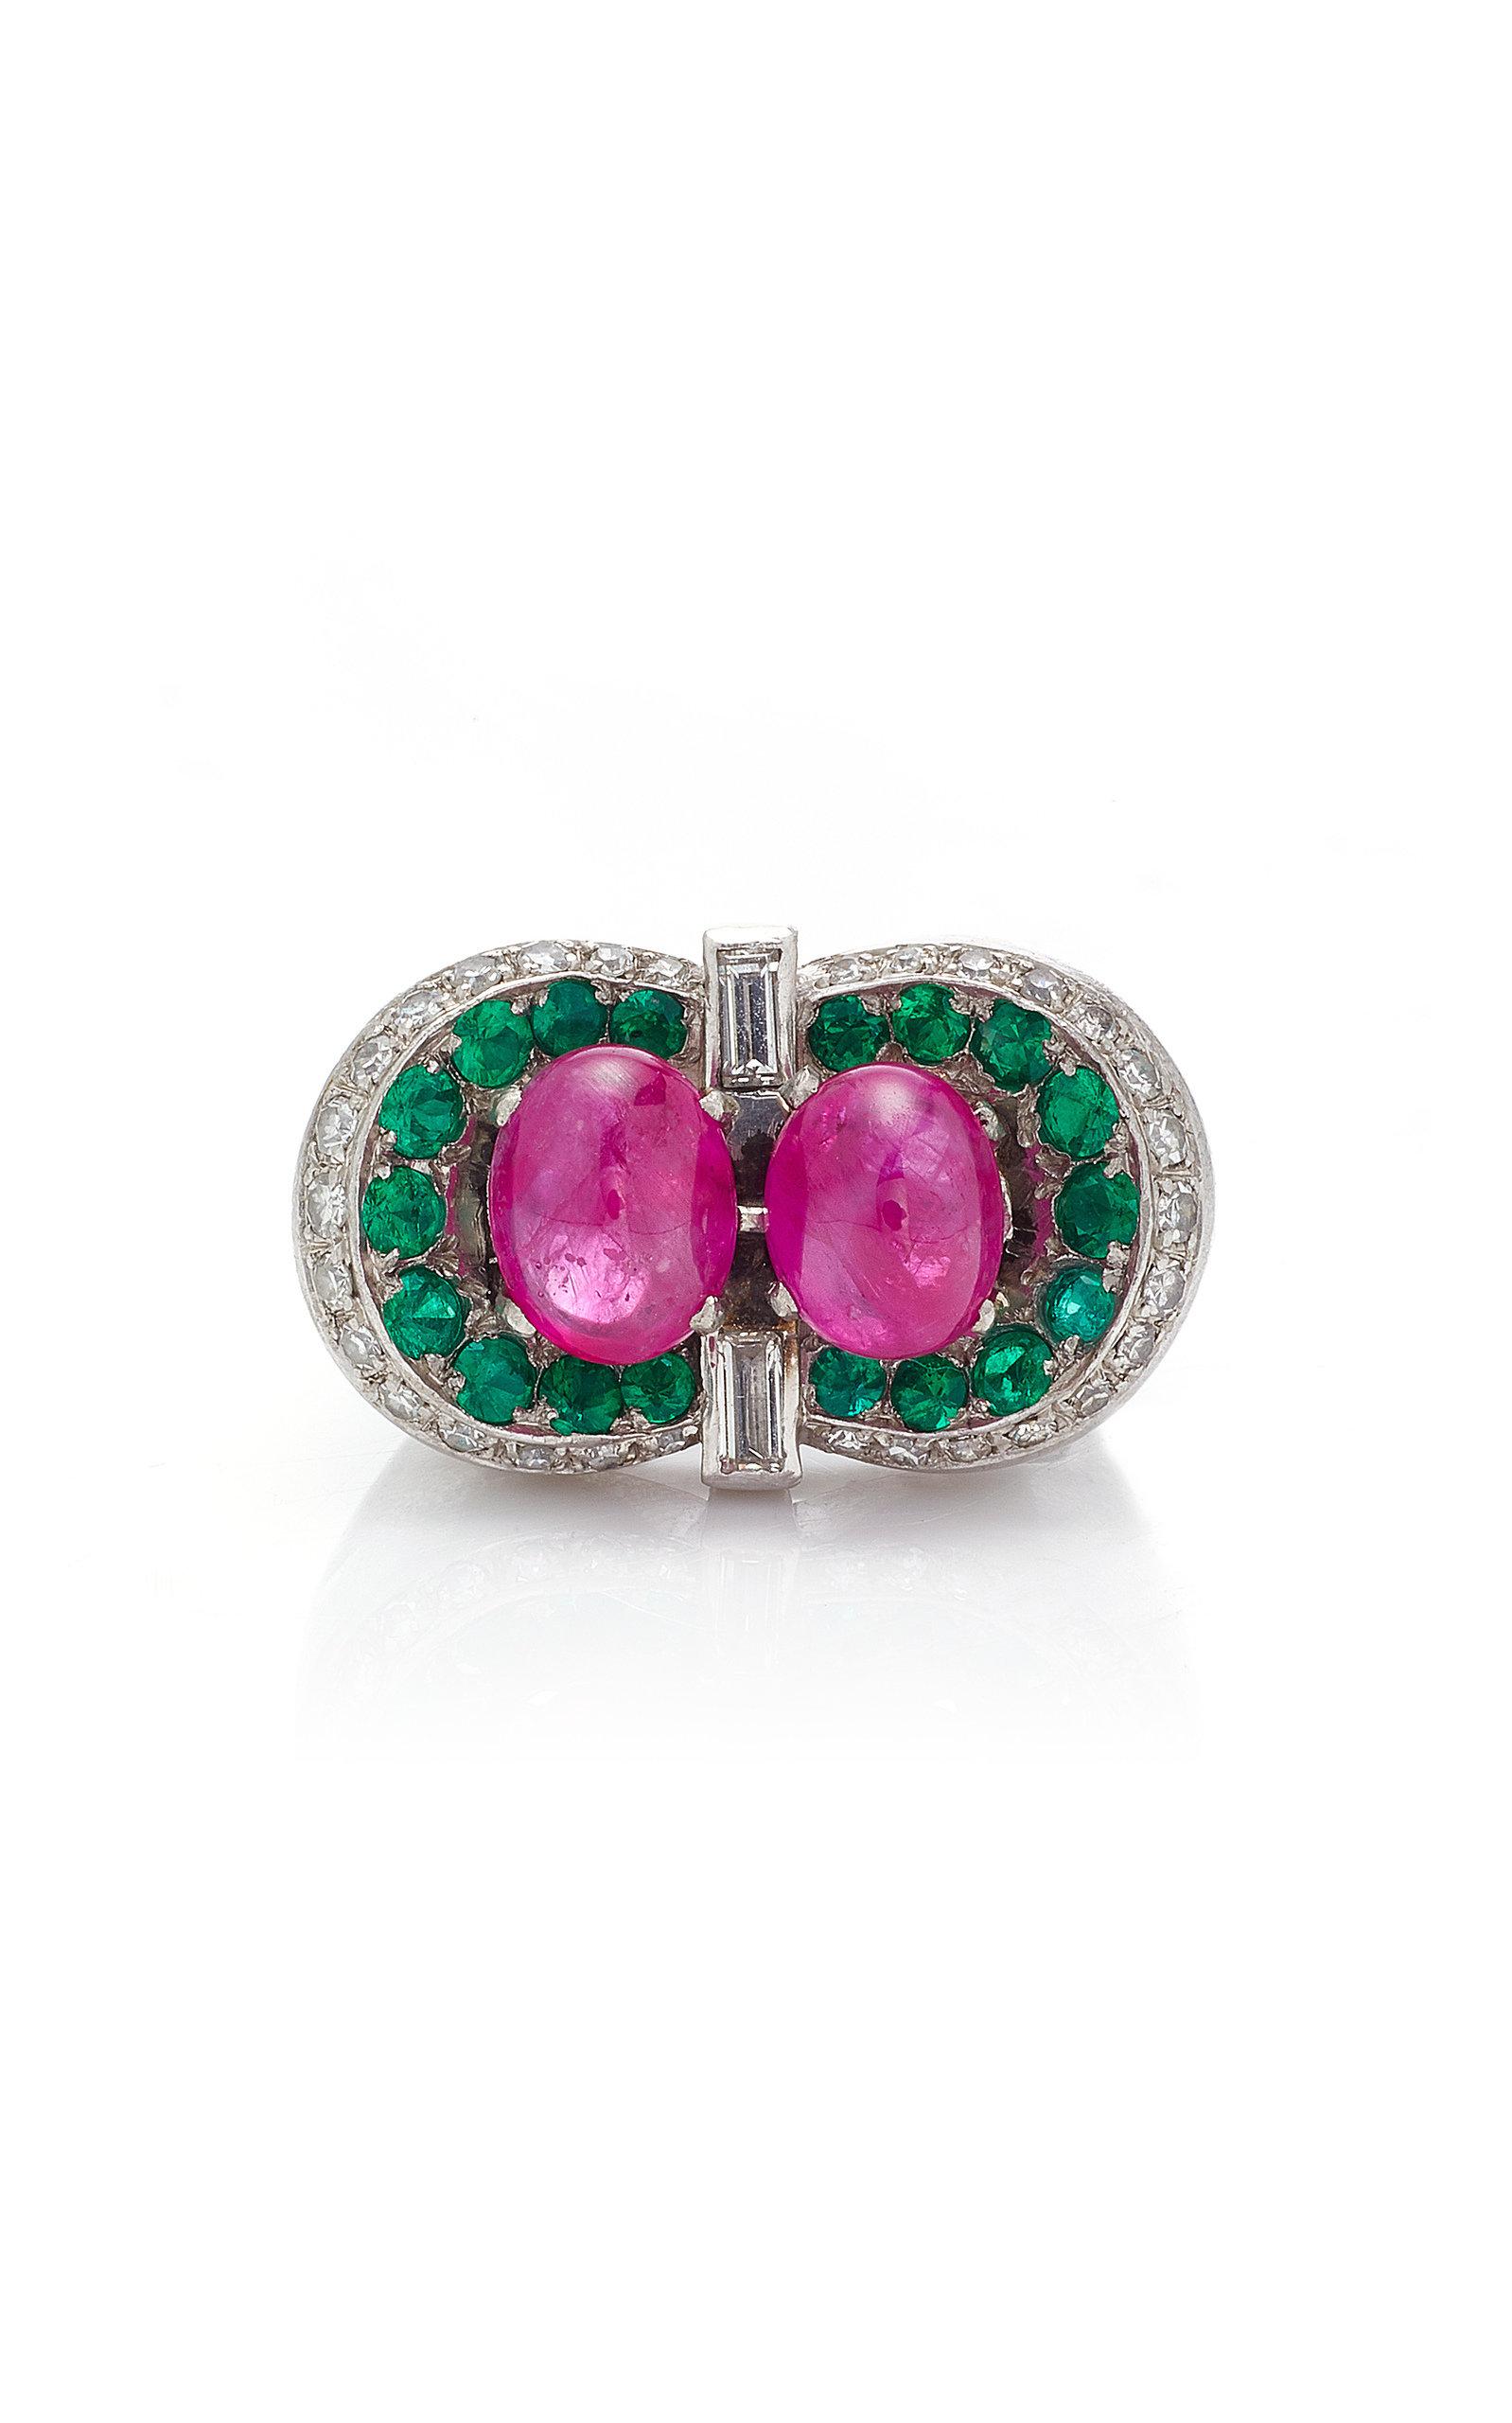 A powerful cocktail ring in 18kt white gold with two baguette cut and eighteen round brilliant cut diamonds (app. 1 ct total), emerald, highlighting two cabochon rubies. Made in Italy, circa 1970s.